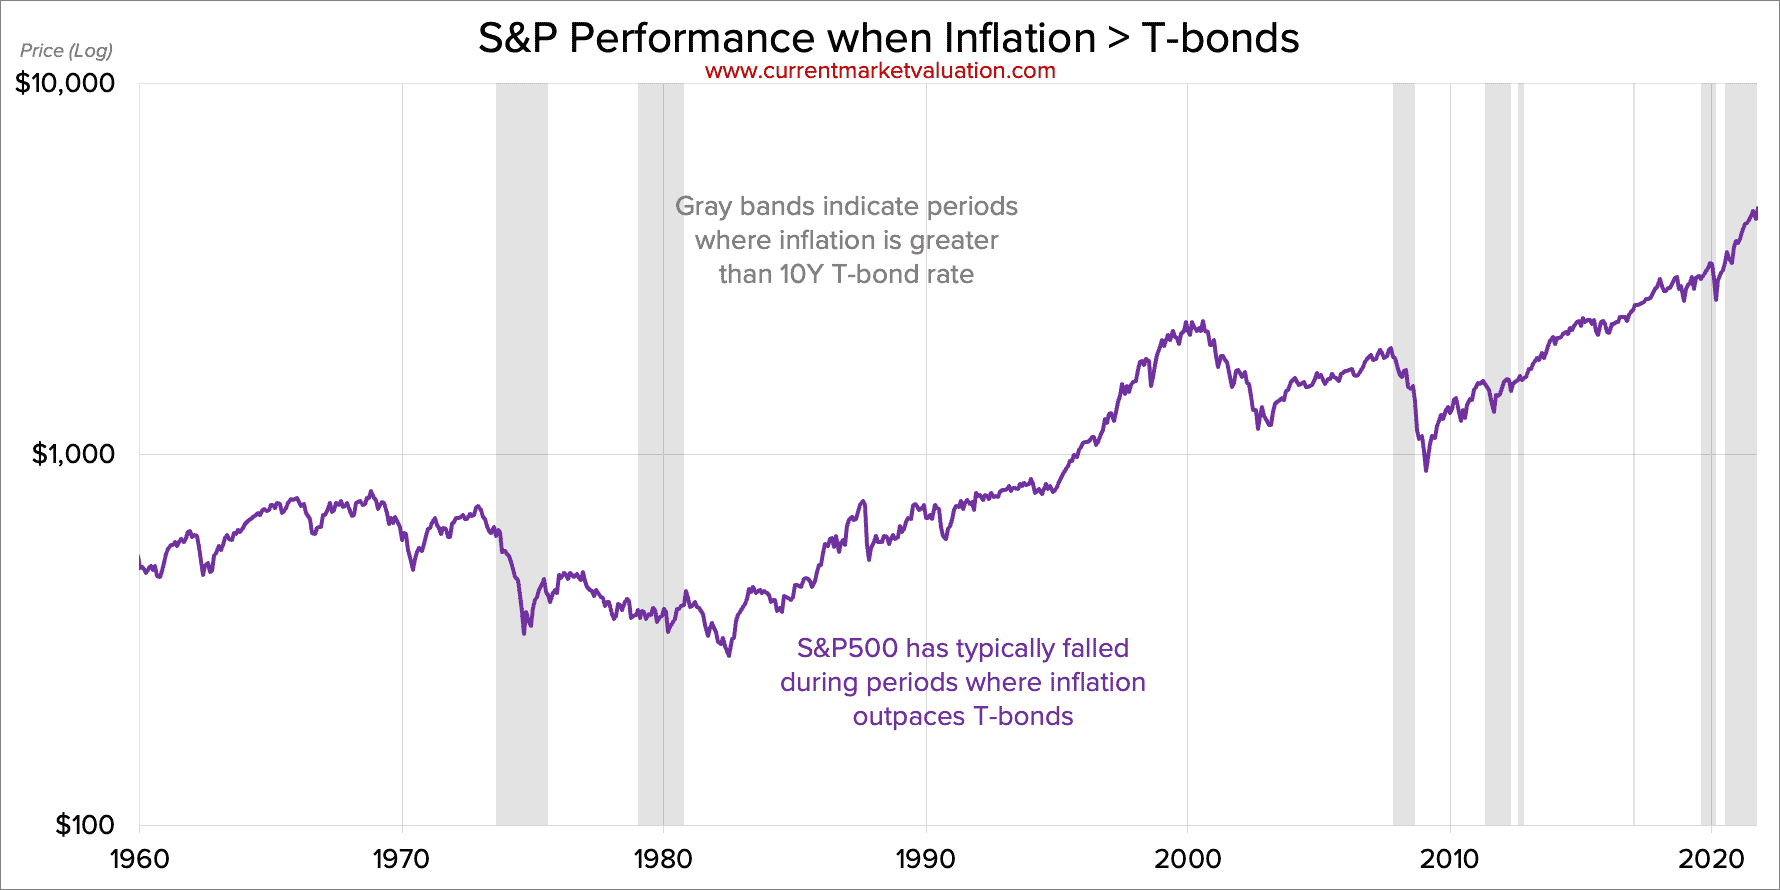 S&P500 Performance During Periods of Inflation > T-bond rates